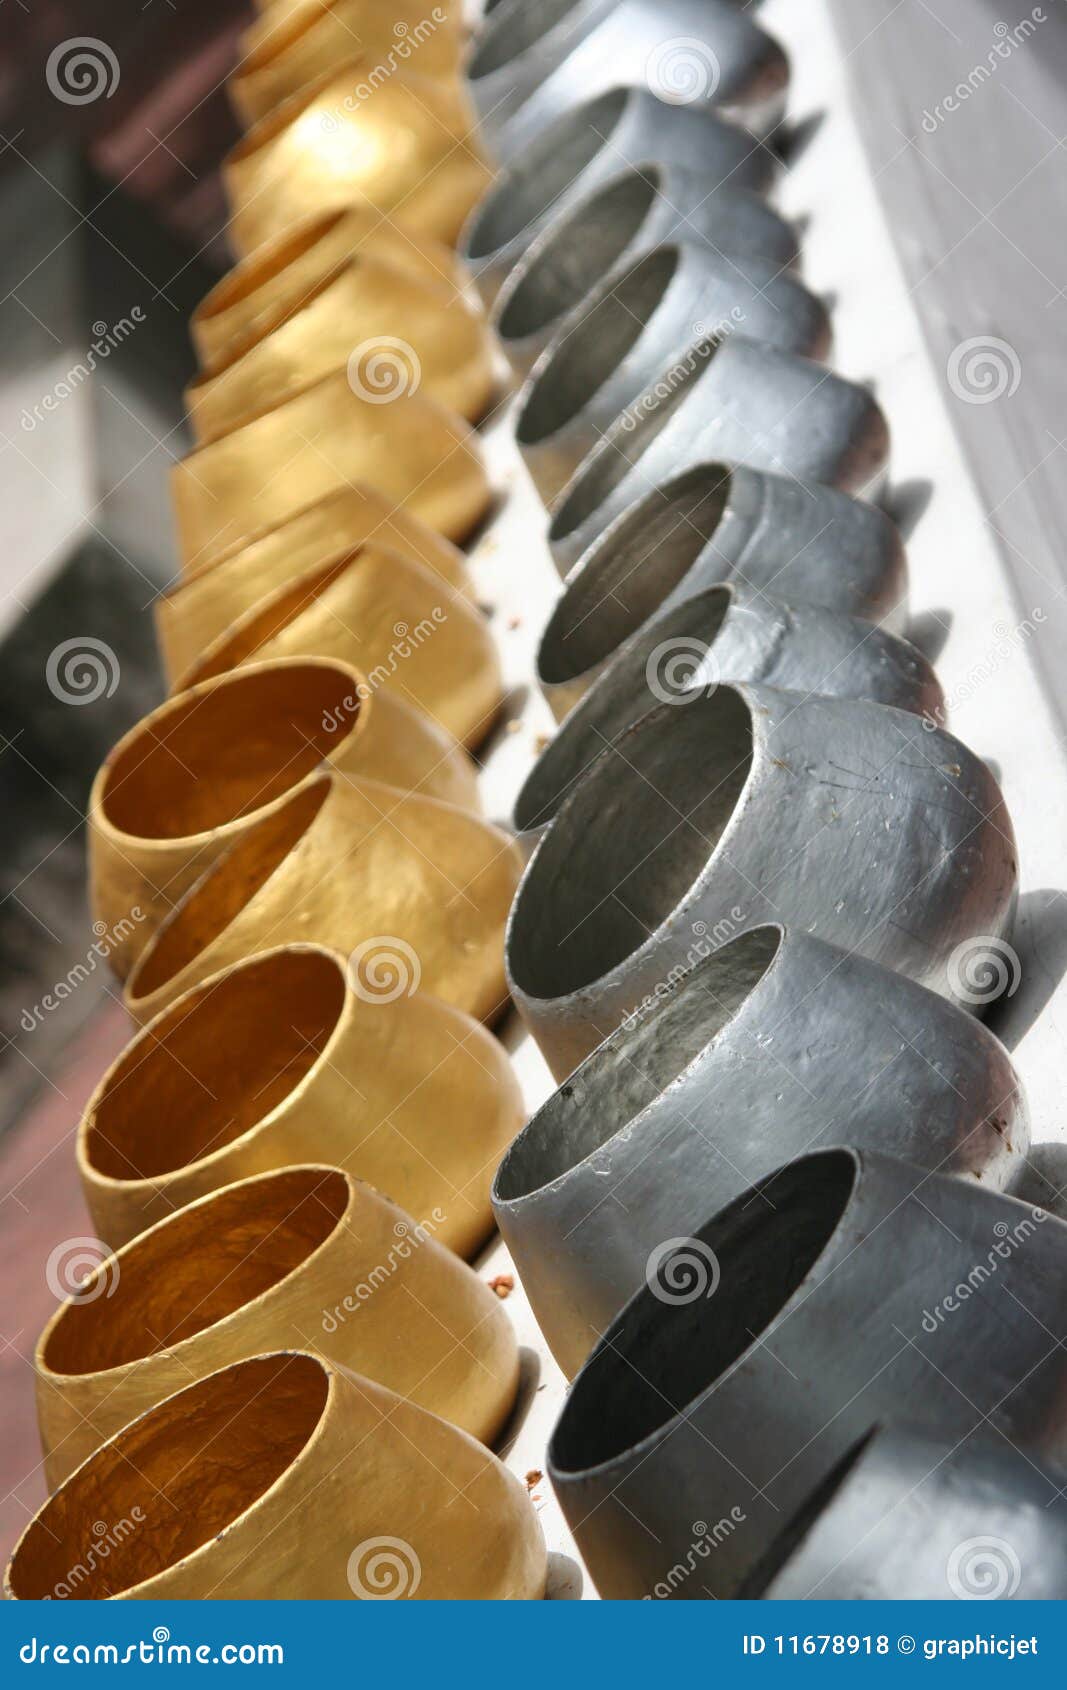 Thai offering cups stock photo. Image of temple, money - 11678918